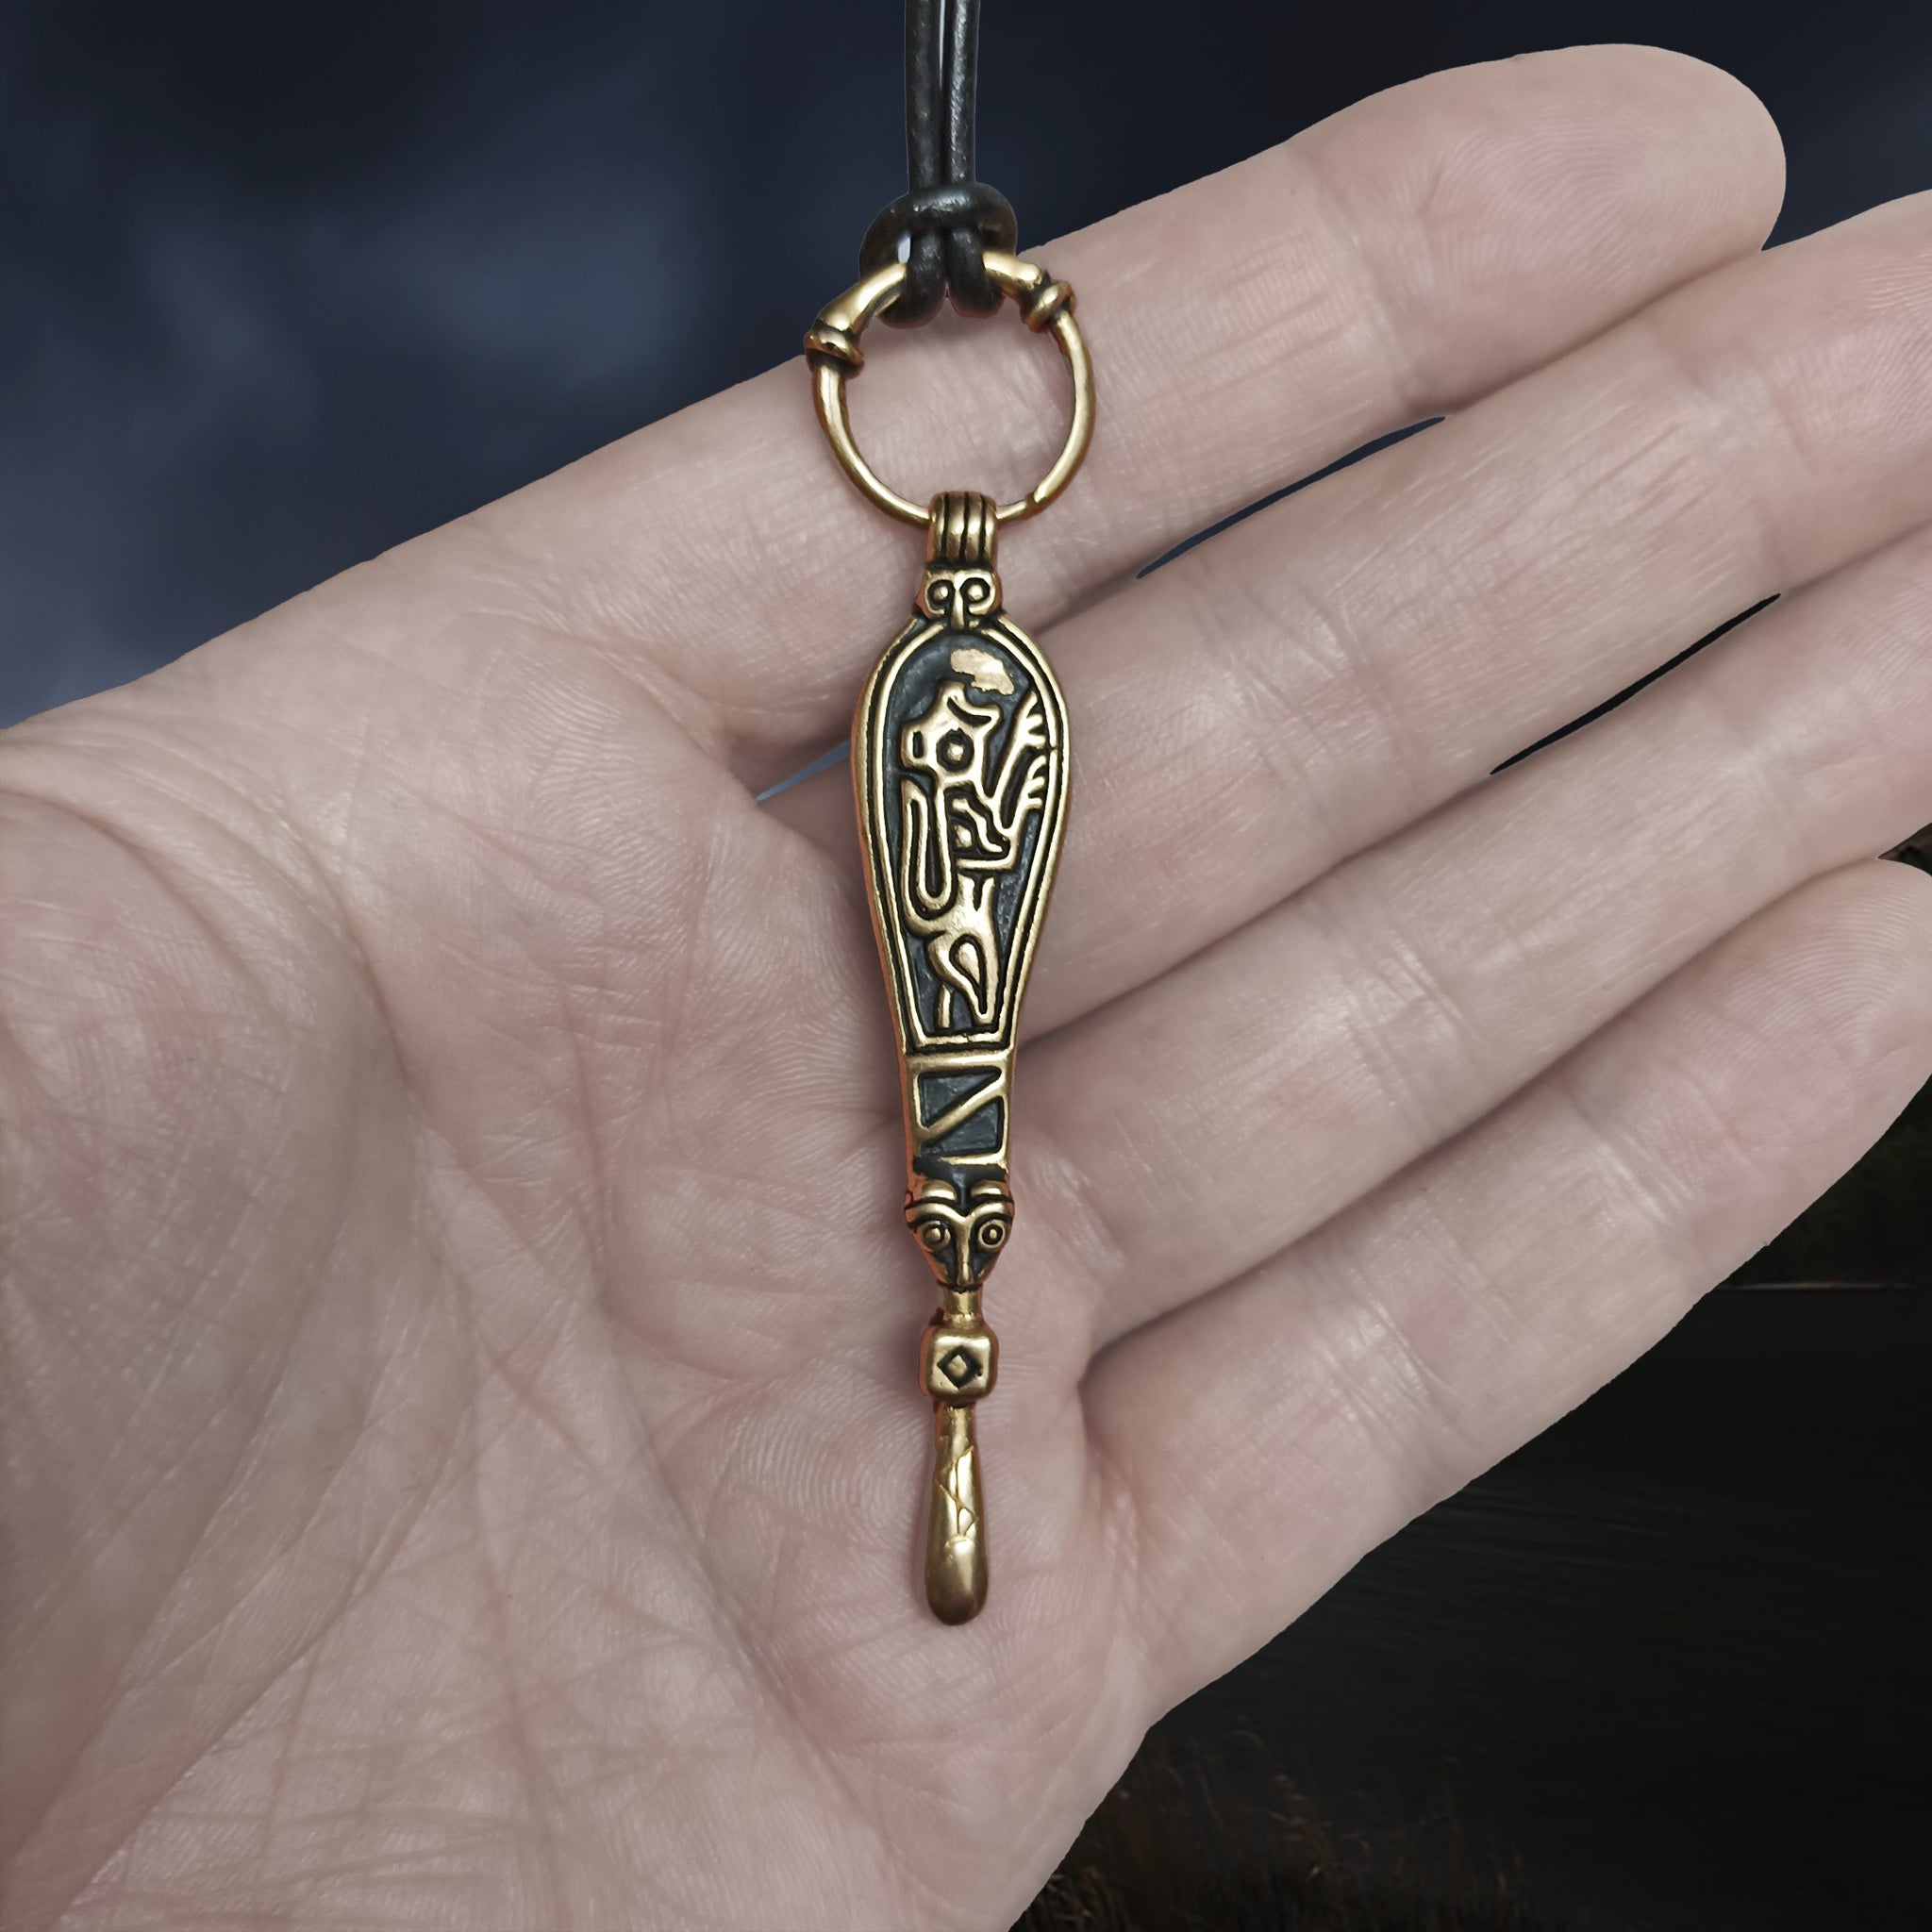 Bronze Ear Spoon Viking Pendant with Ring Hanger on Leather Thong - Reverse Side with Animal Depiction